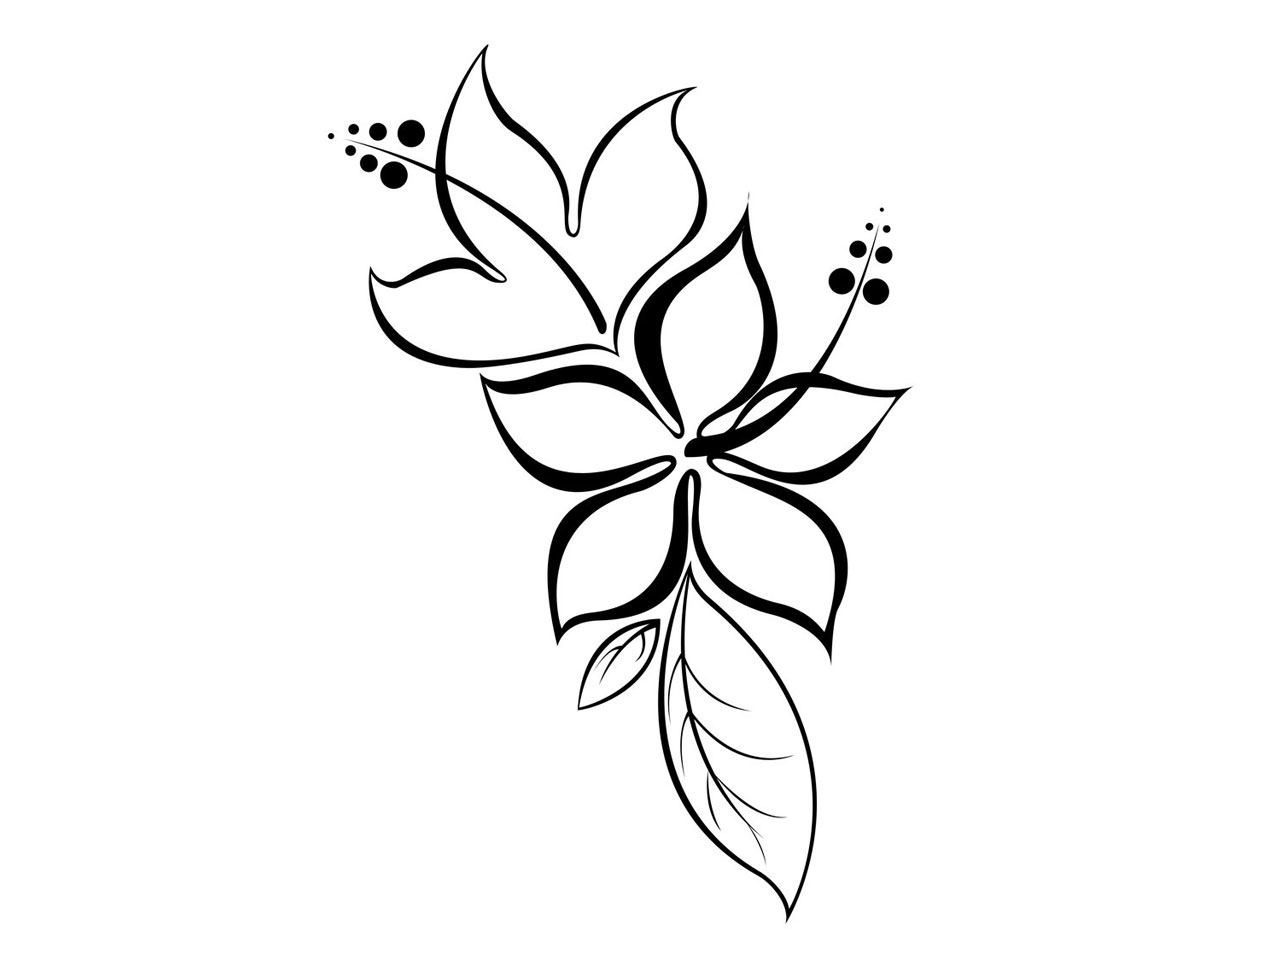 100,000 Simple tattoo designs Vector Images | Depositphotos